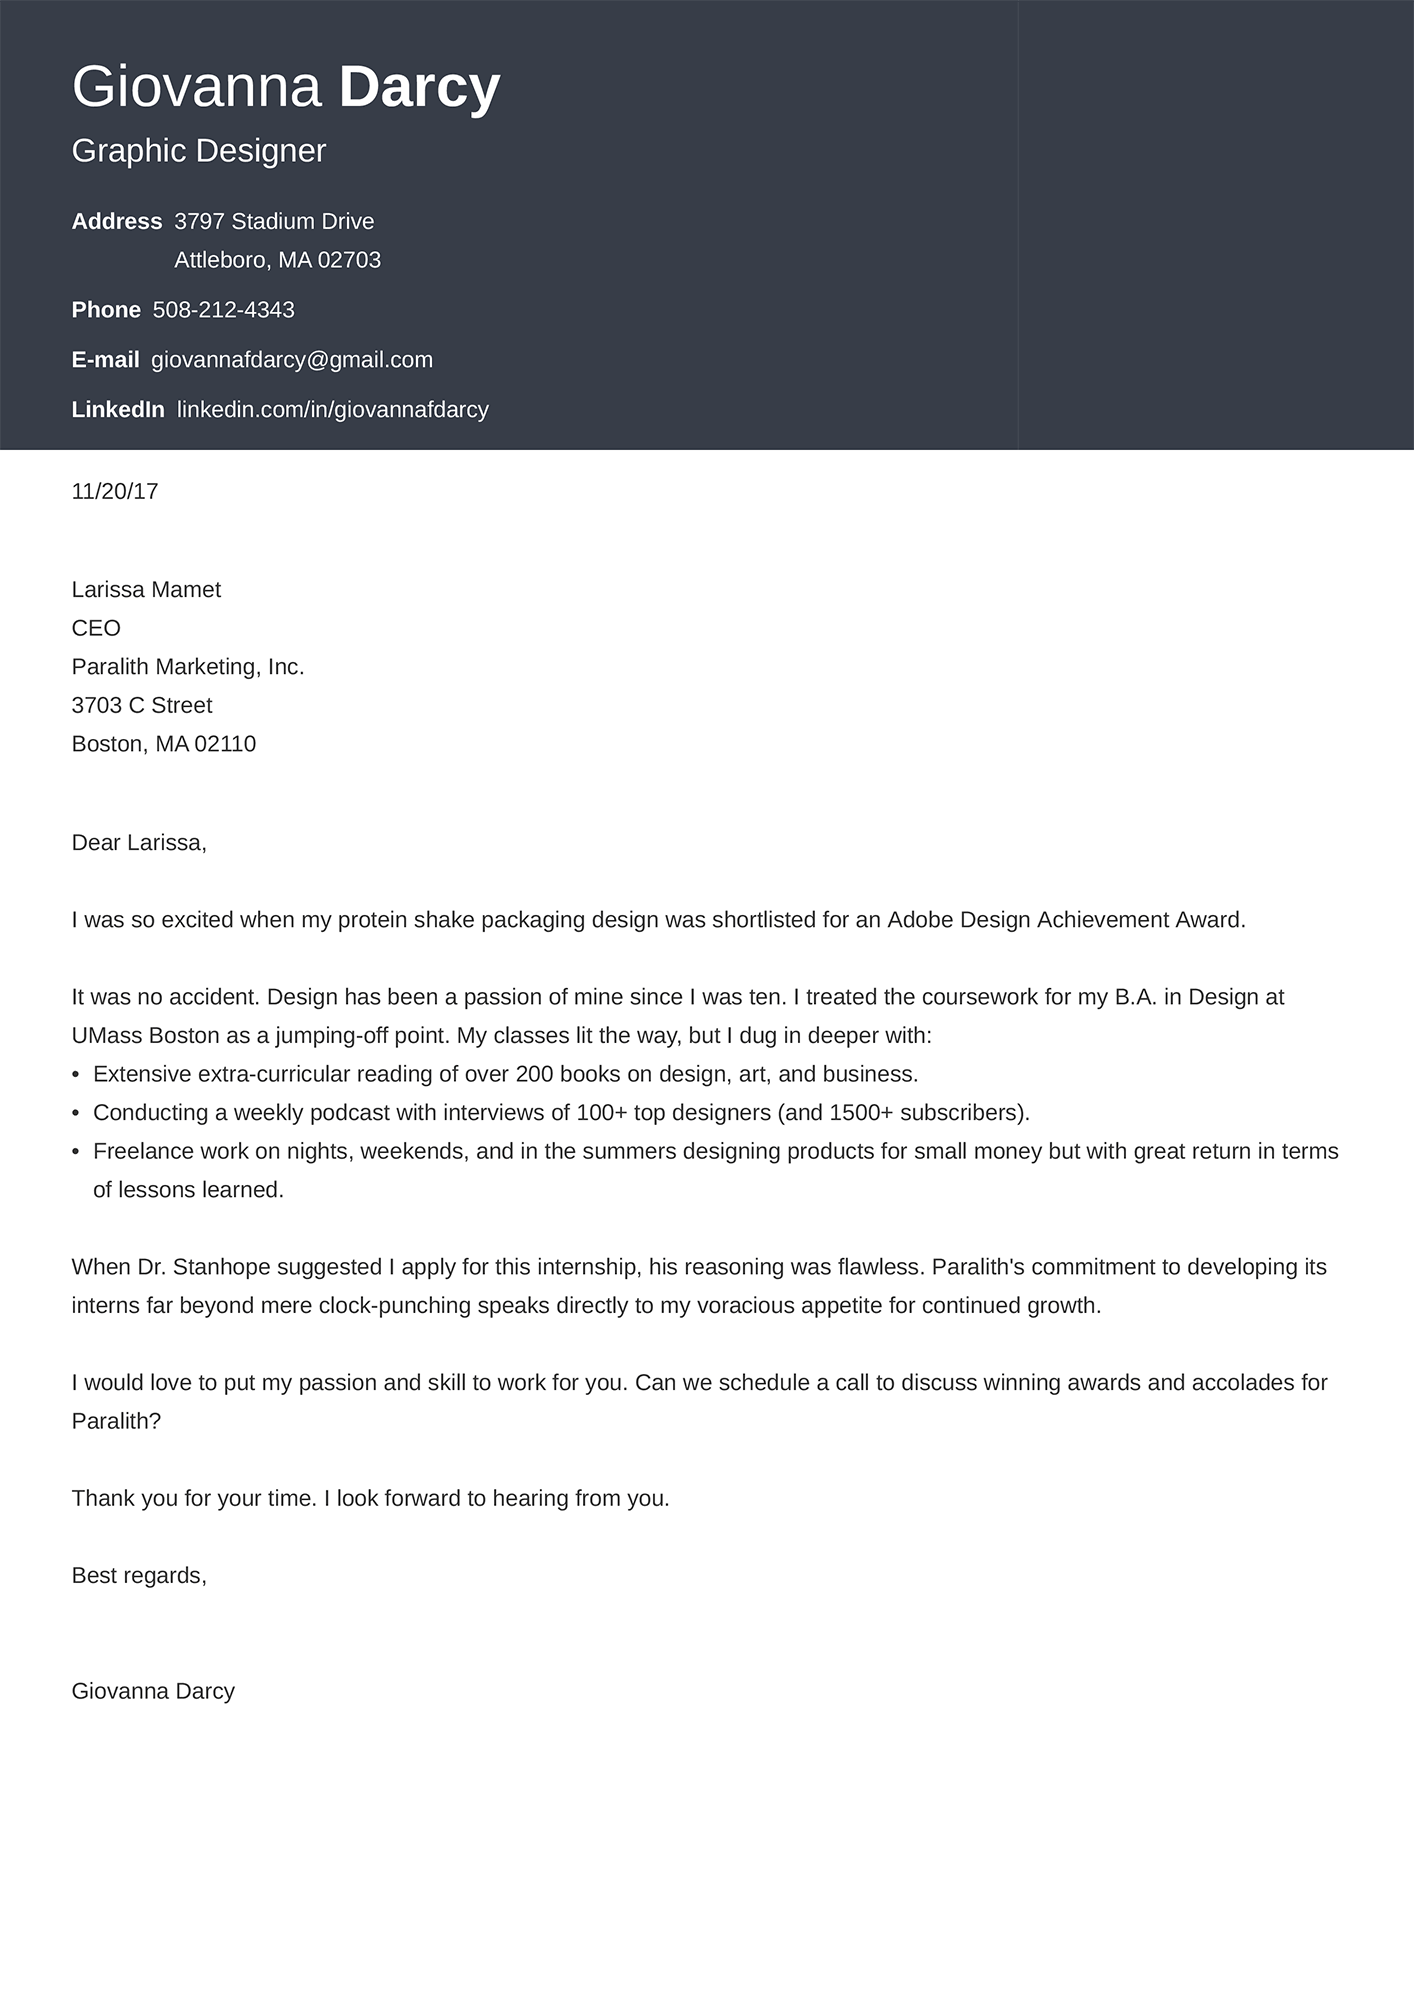 Sample Academic Cover Letter from cdn-images.zety.com